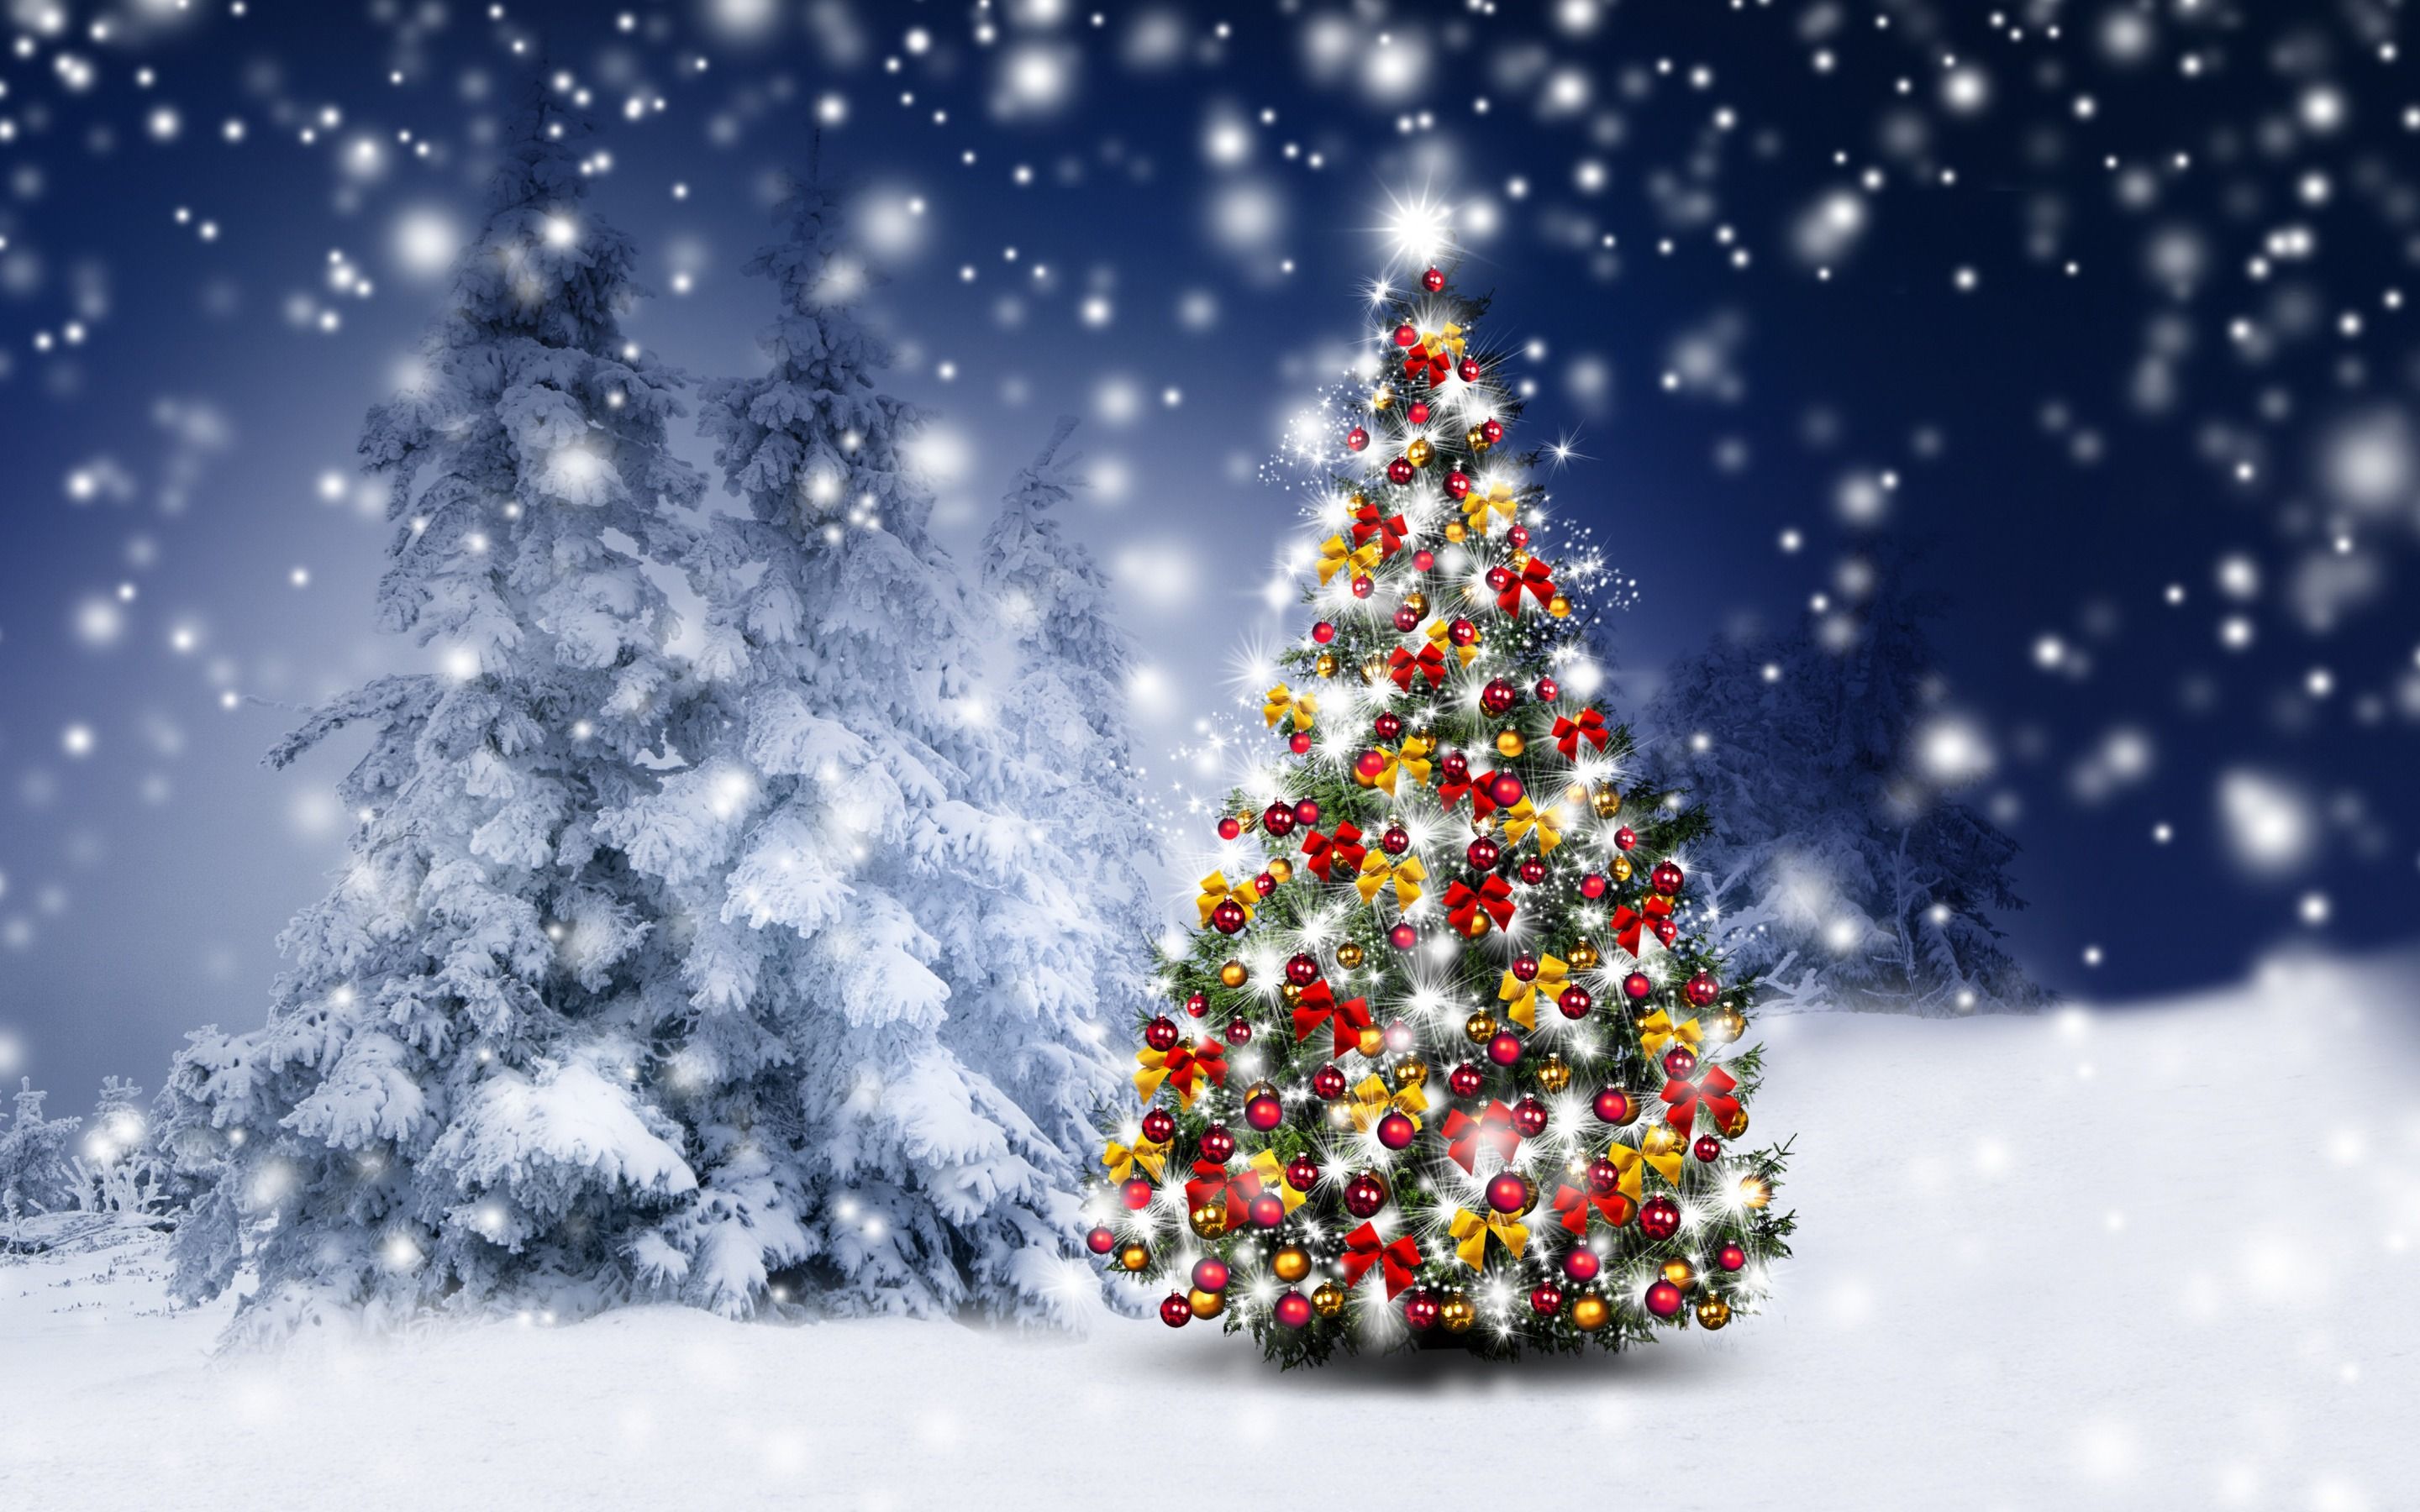 Download wallpaper Merry Christmas, winter, new year, snow, forest, Christmas tree, Xmas for desktop with resolution 2880x1800. High Quality HD picture wallpaper